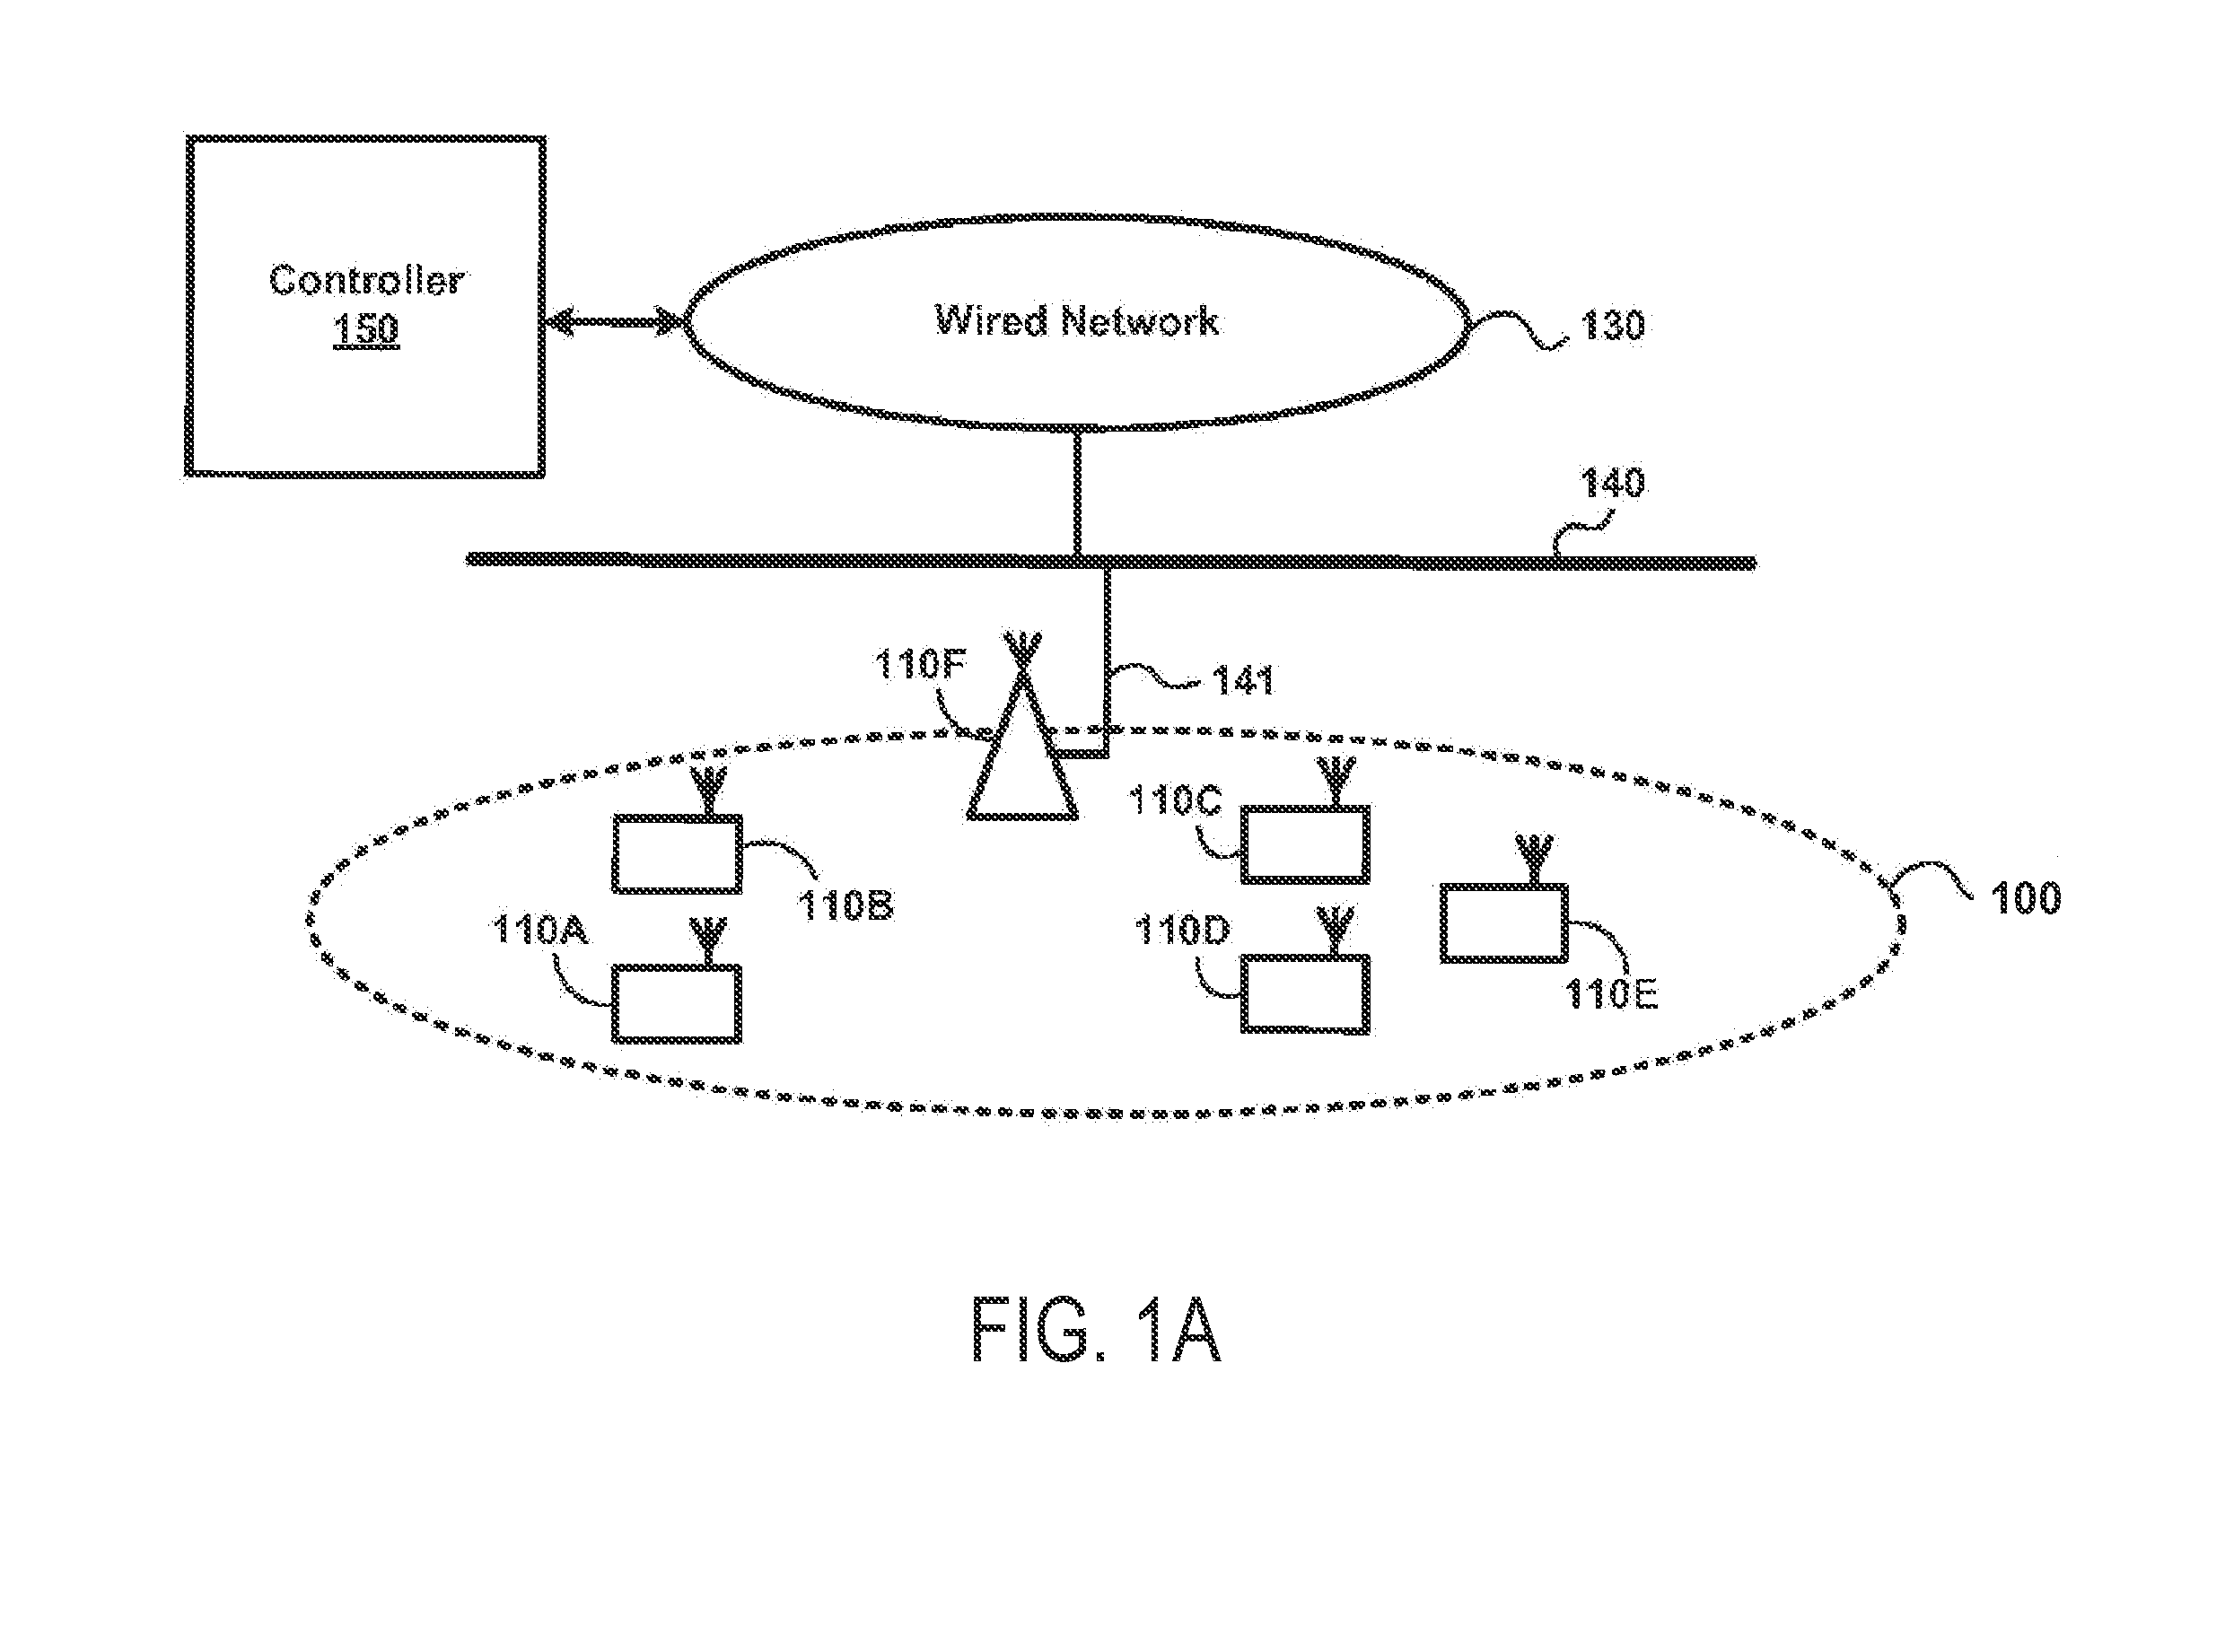 Communication protocol between access point and wireless station